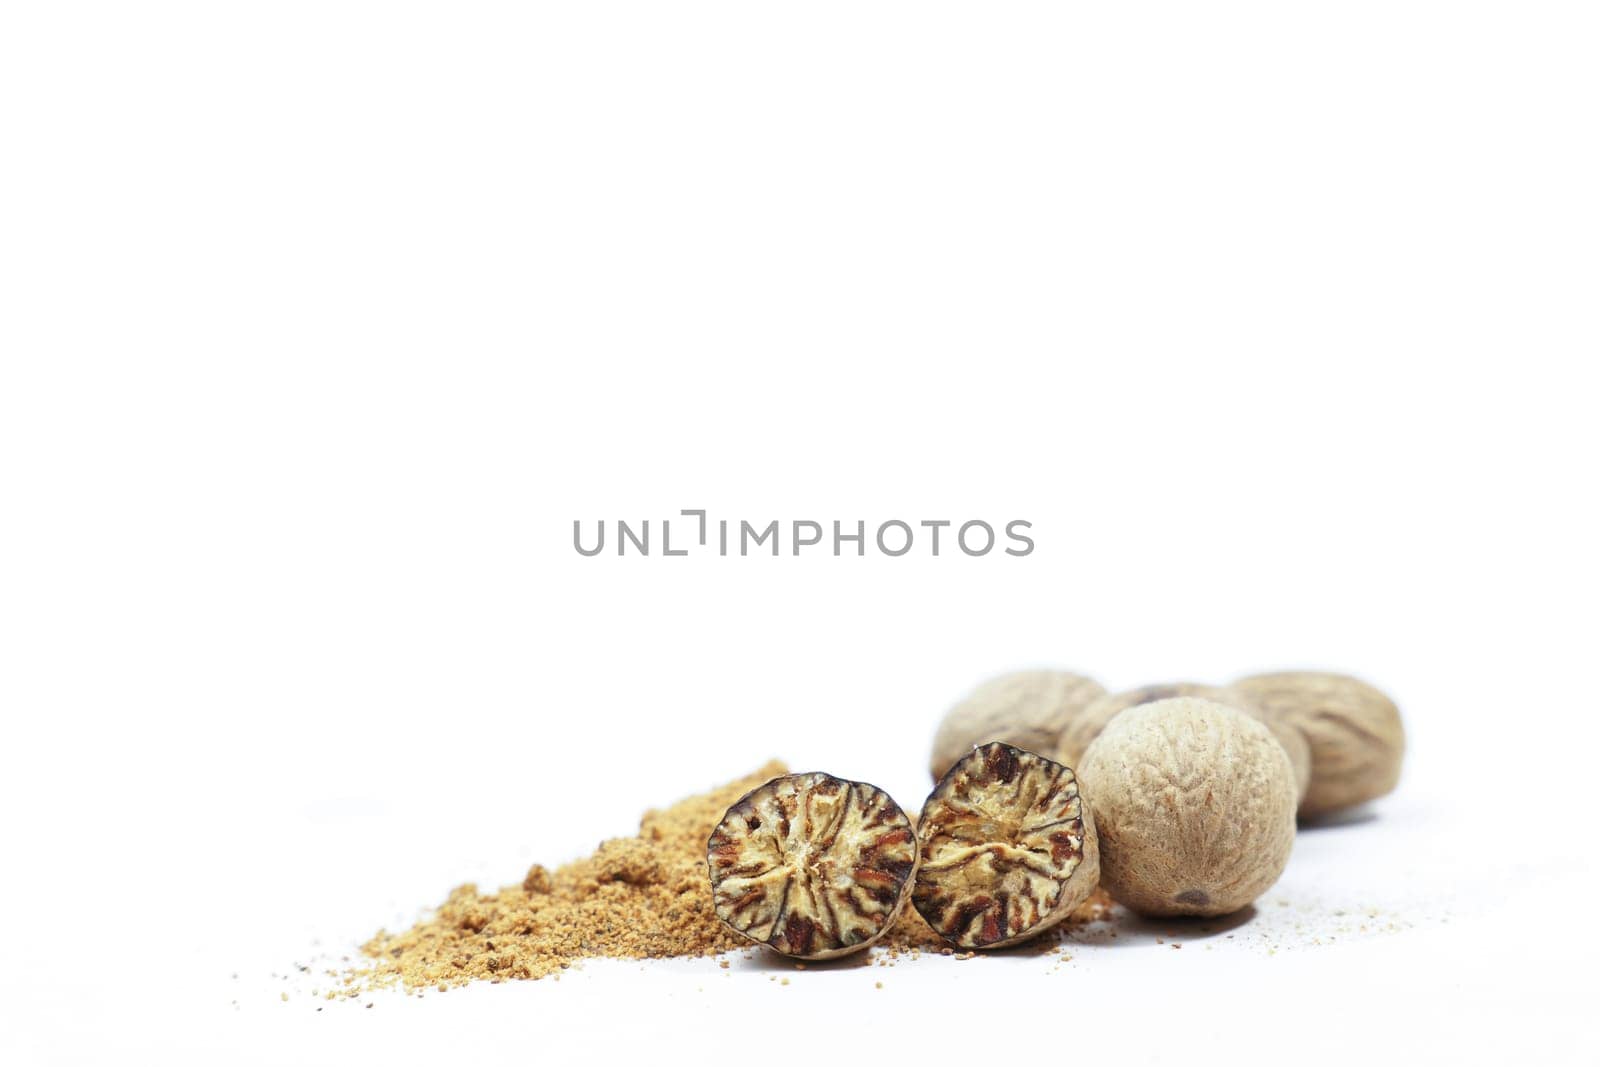 whole nutmeg, halved and ground, on a wooden spoon by joseantona